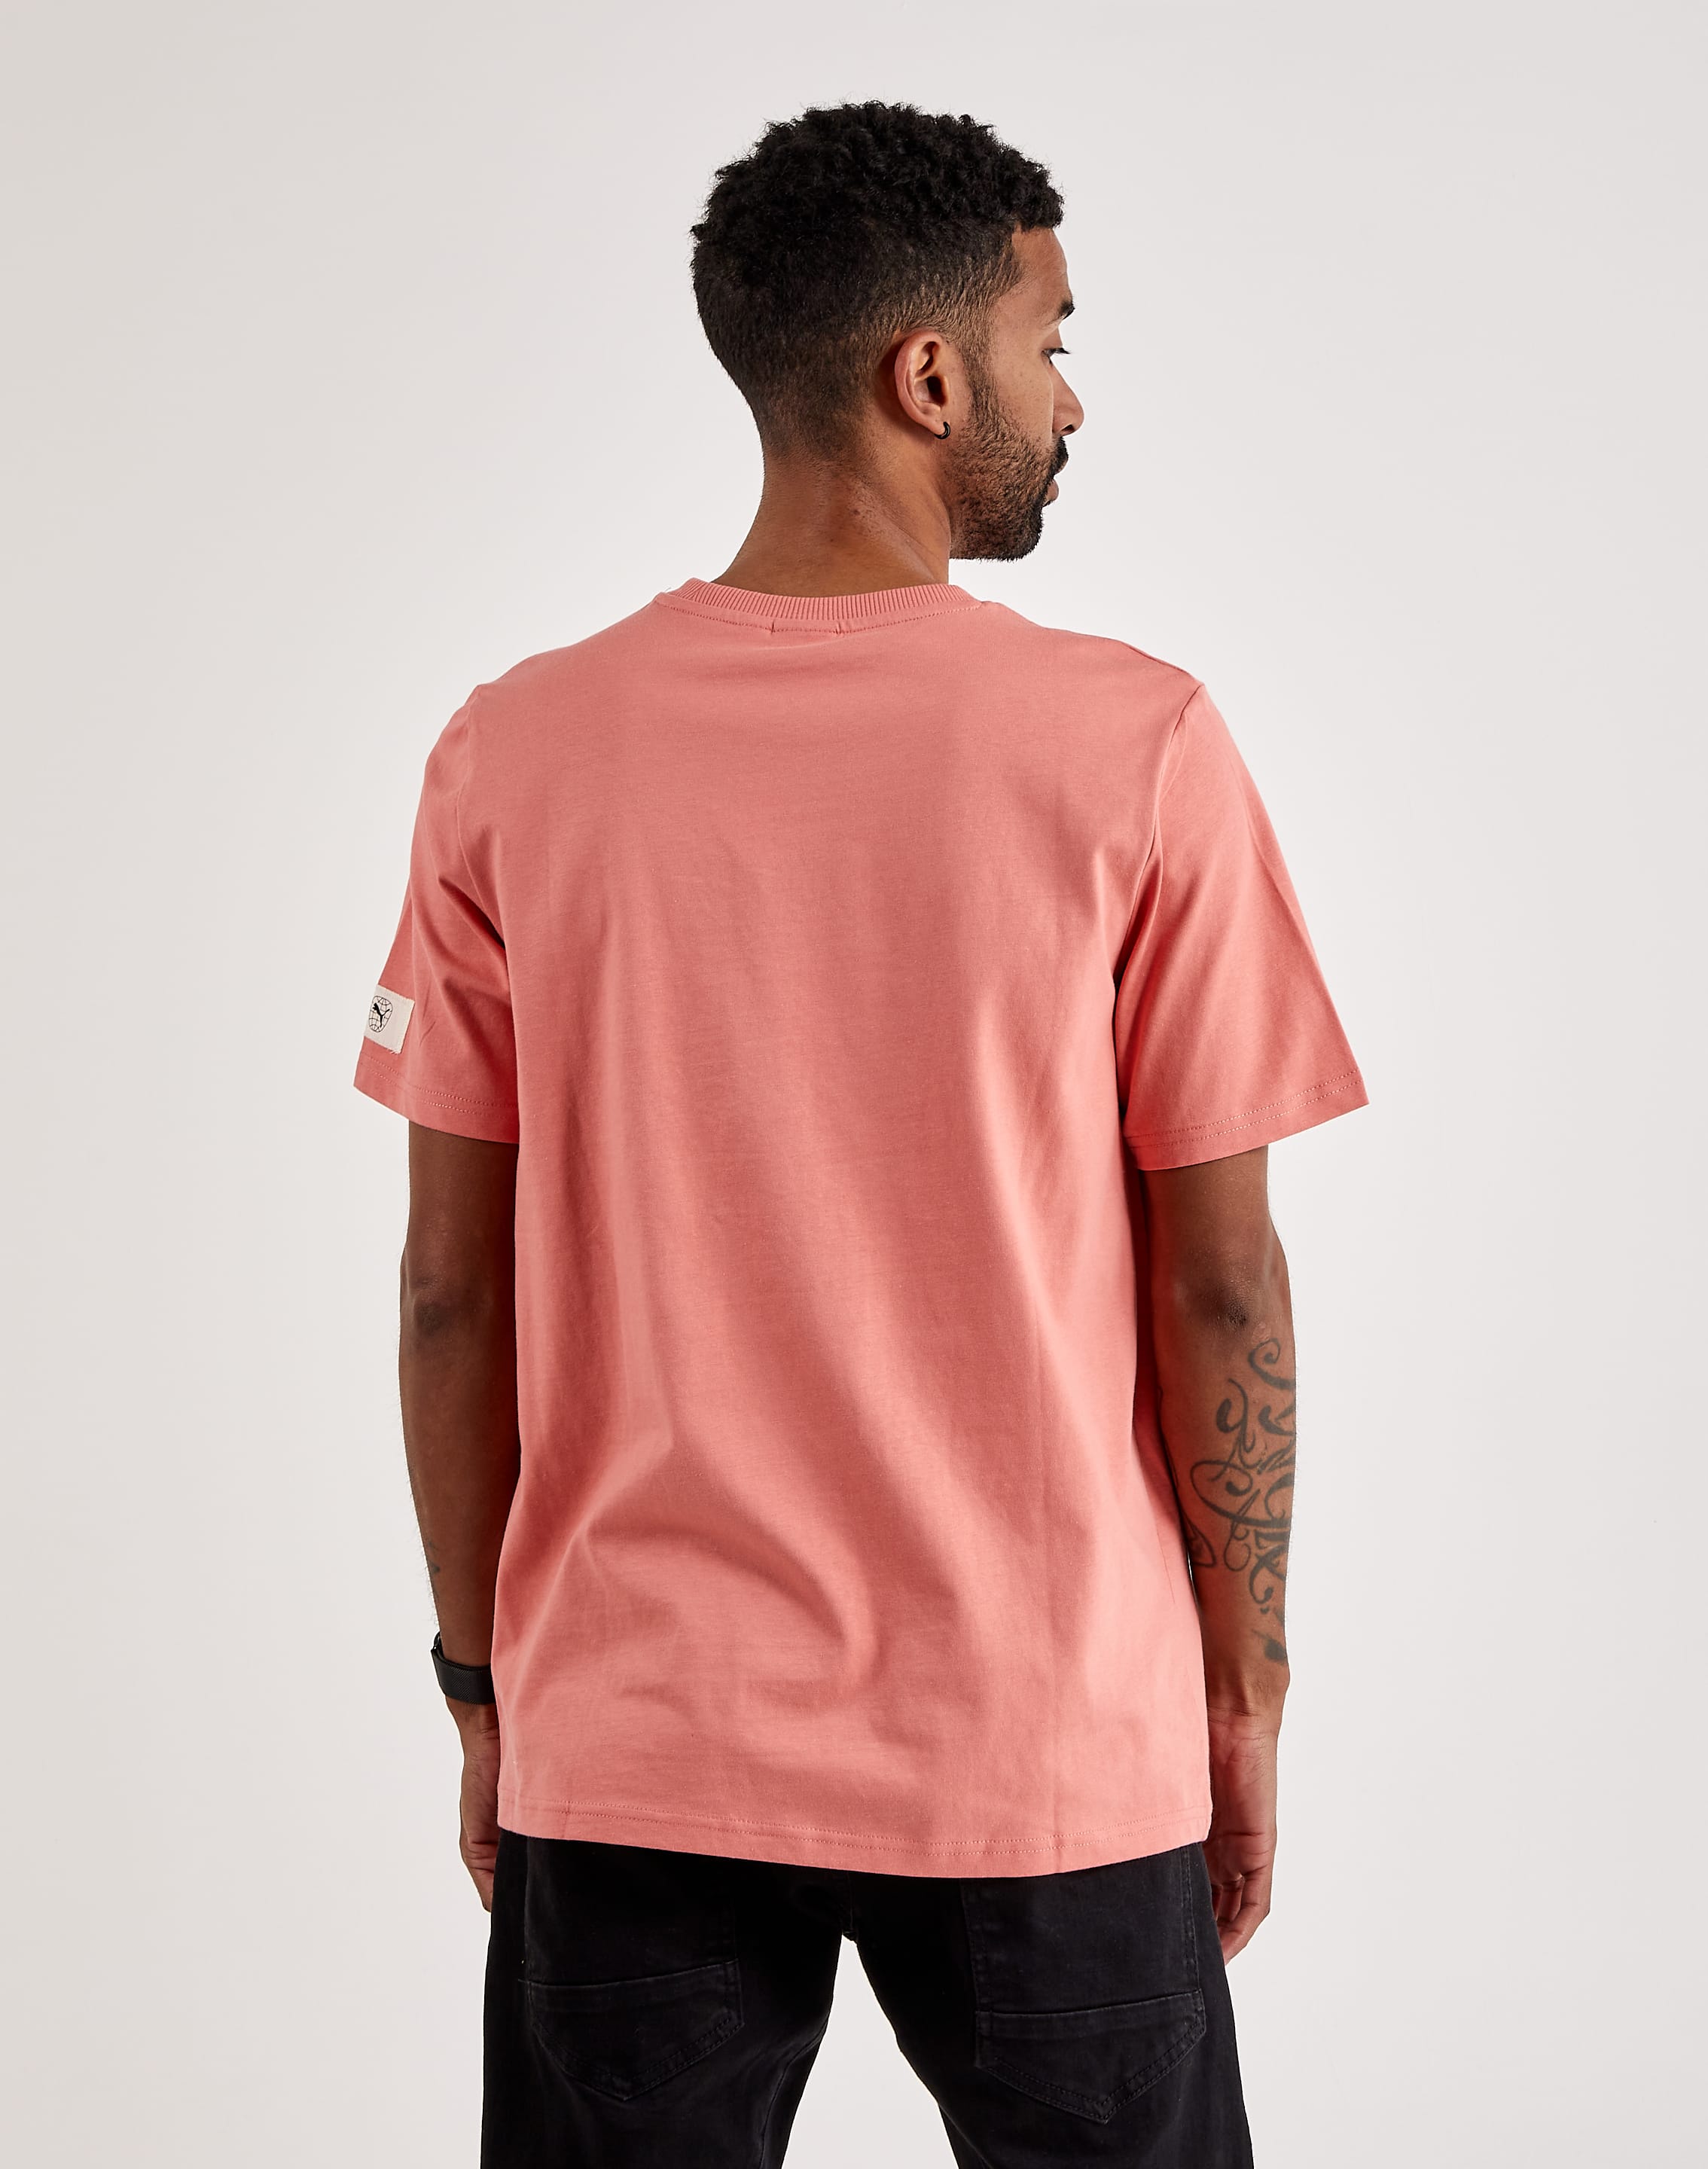 DTLR – Puma Tee Rotate Re:Escape